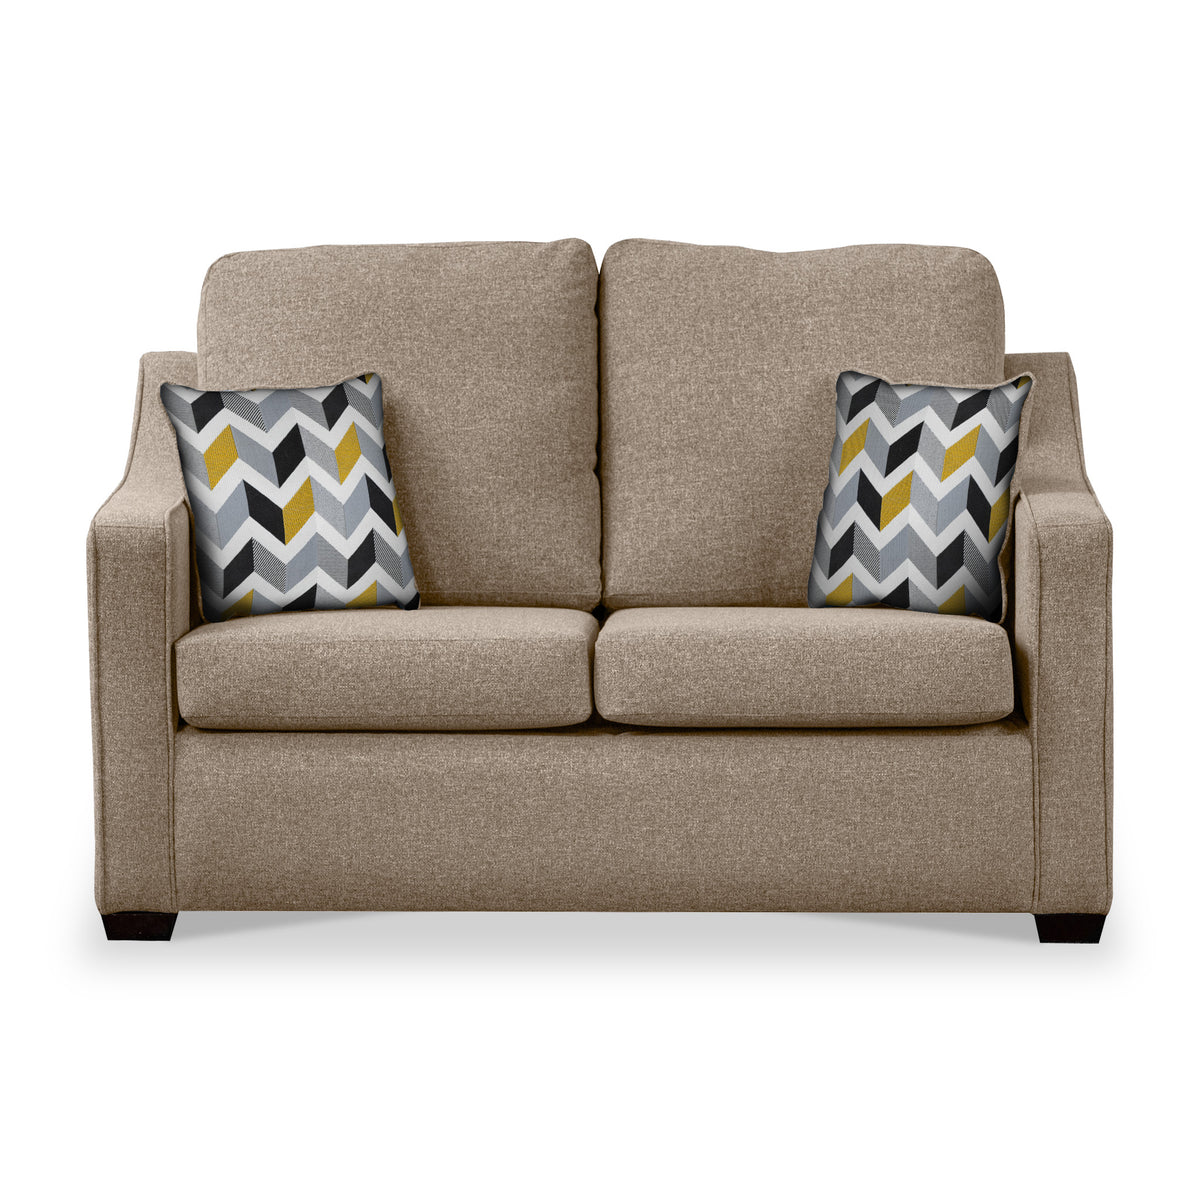 Fenton Fawn Soft Weave 2 Seater Sofabed with Mustard Scatter Cushions from Roseland Furniture